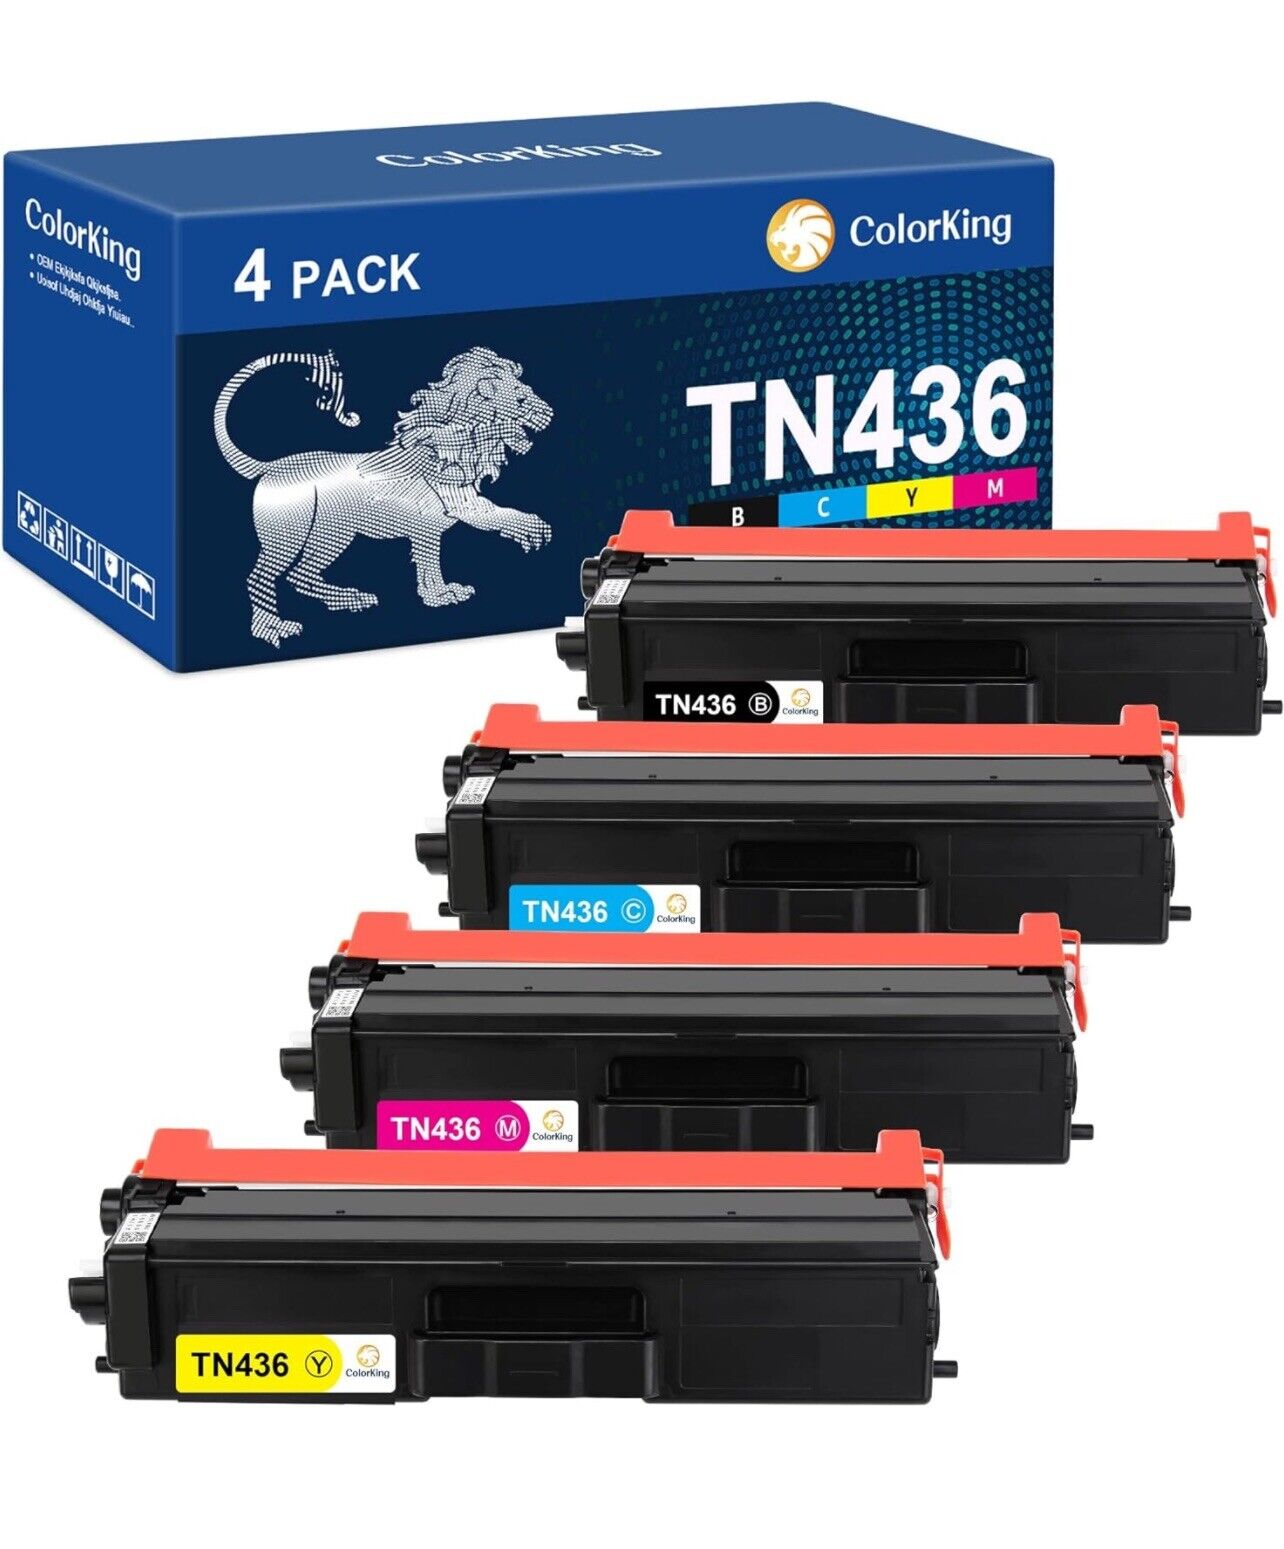 ColorKing Compatible Toner Cartridge Replacement for Brother TN436 (4 Pack)